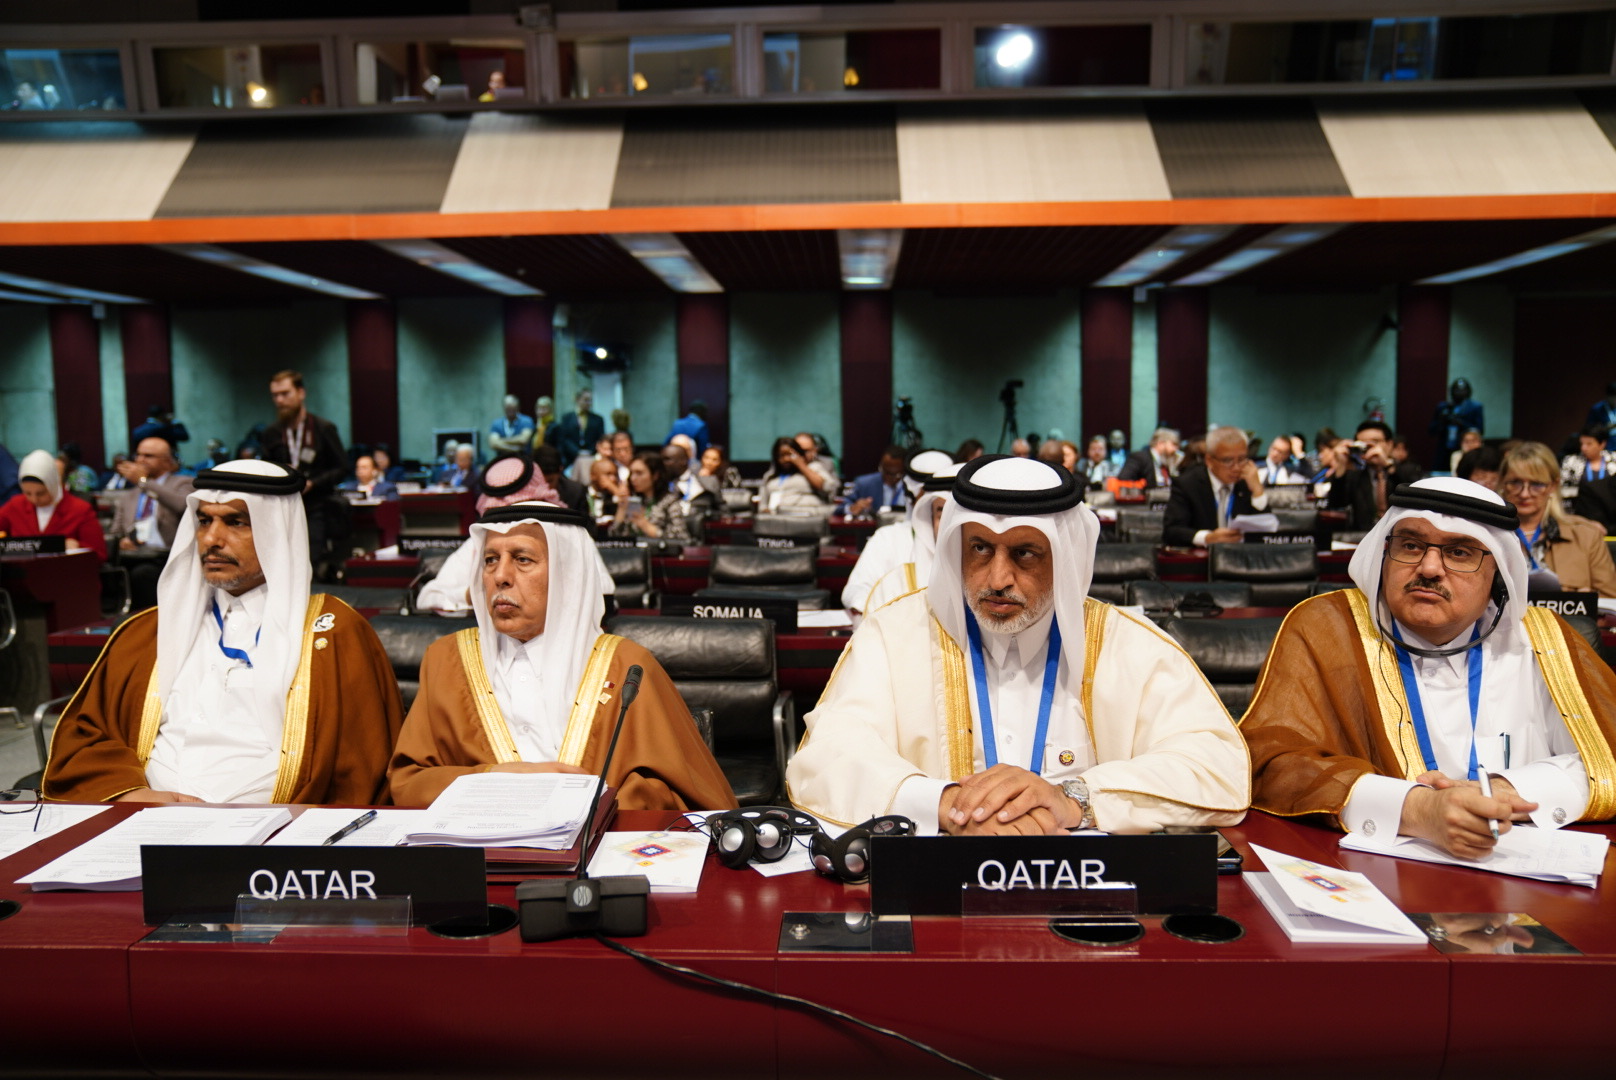 Speaker of Shura Council Participates in Closing Session of IPU General Assembly